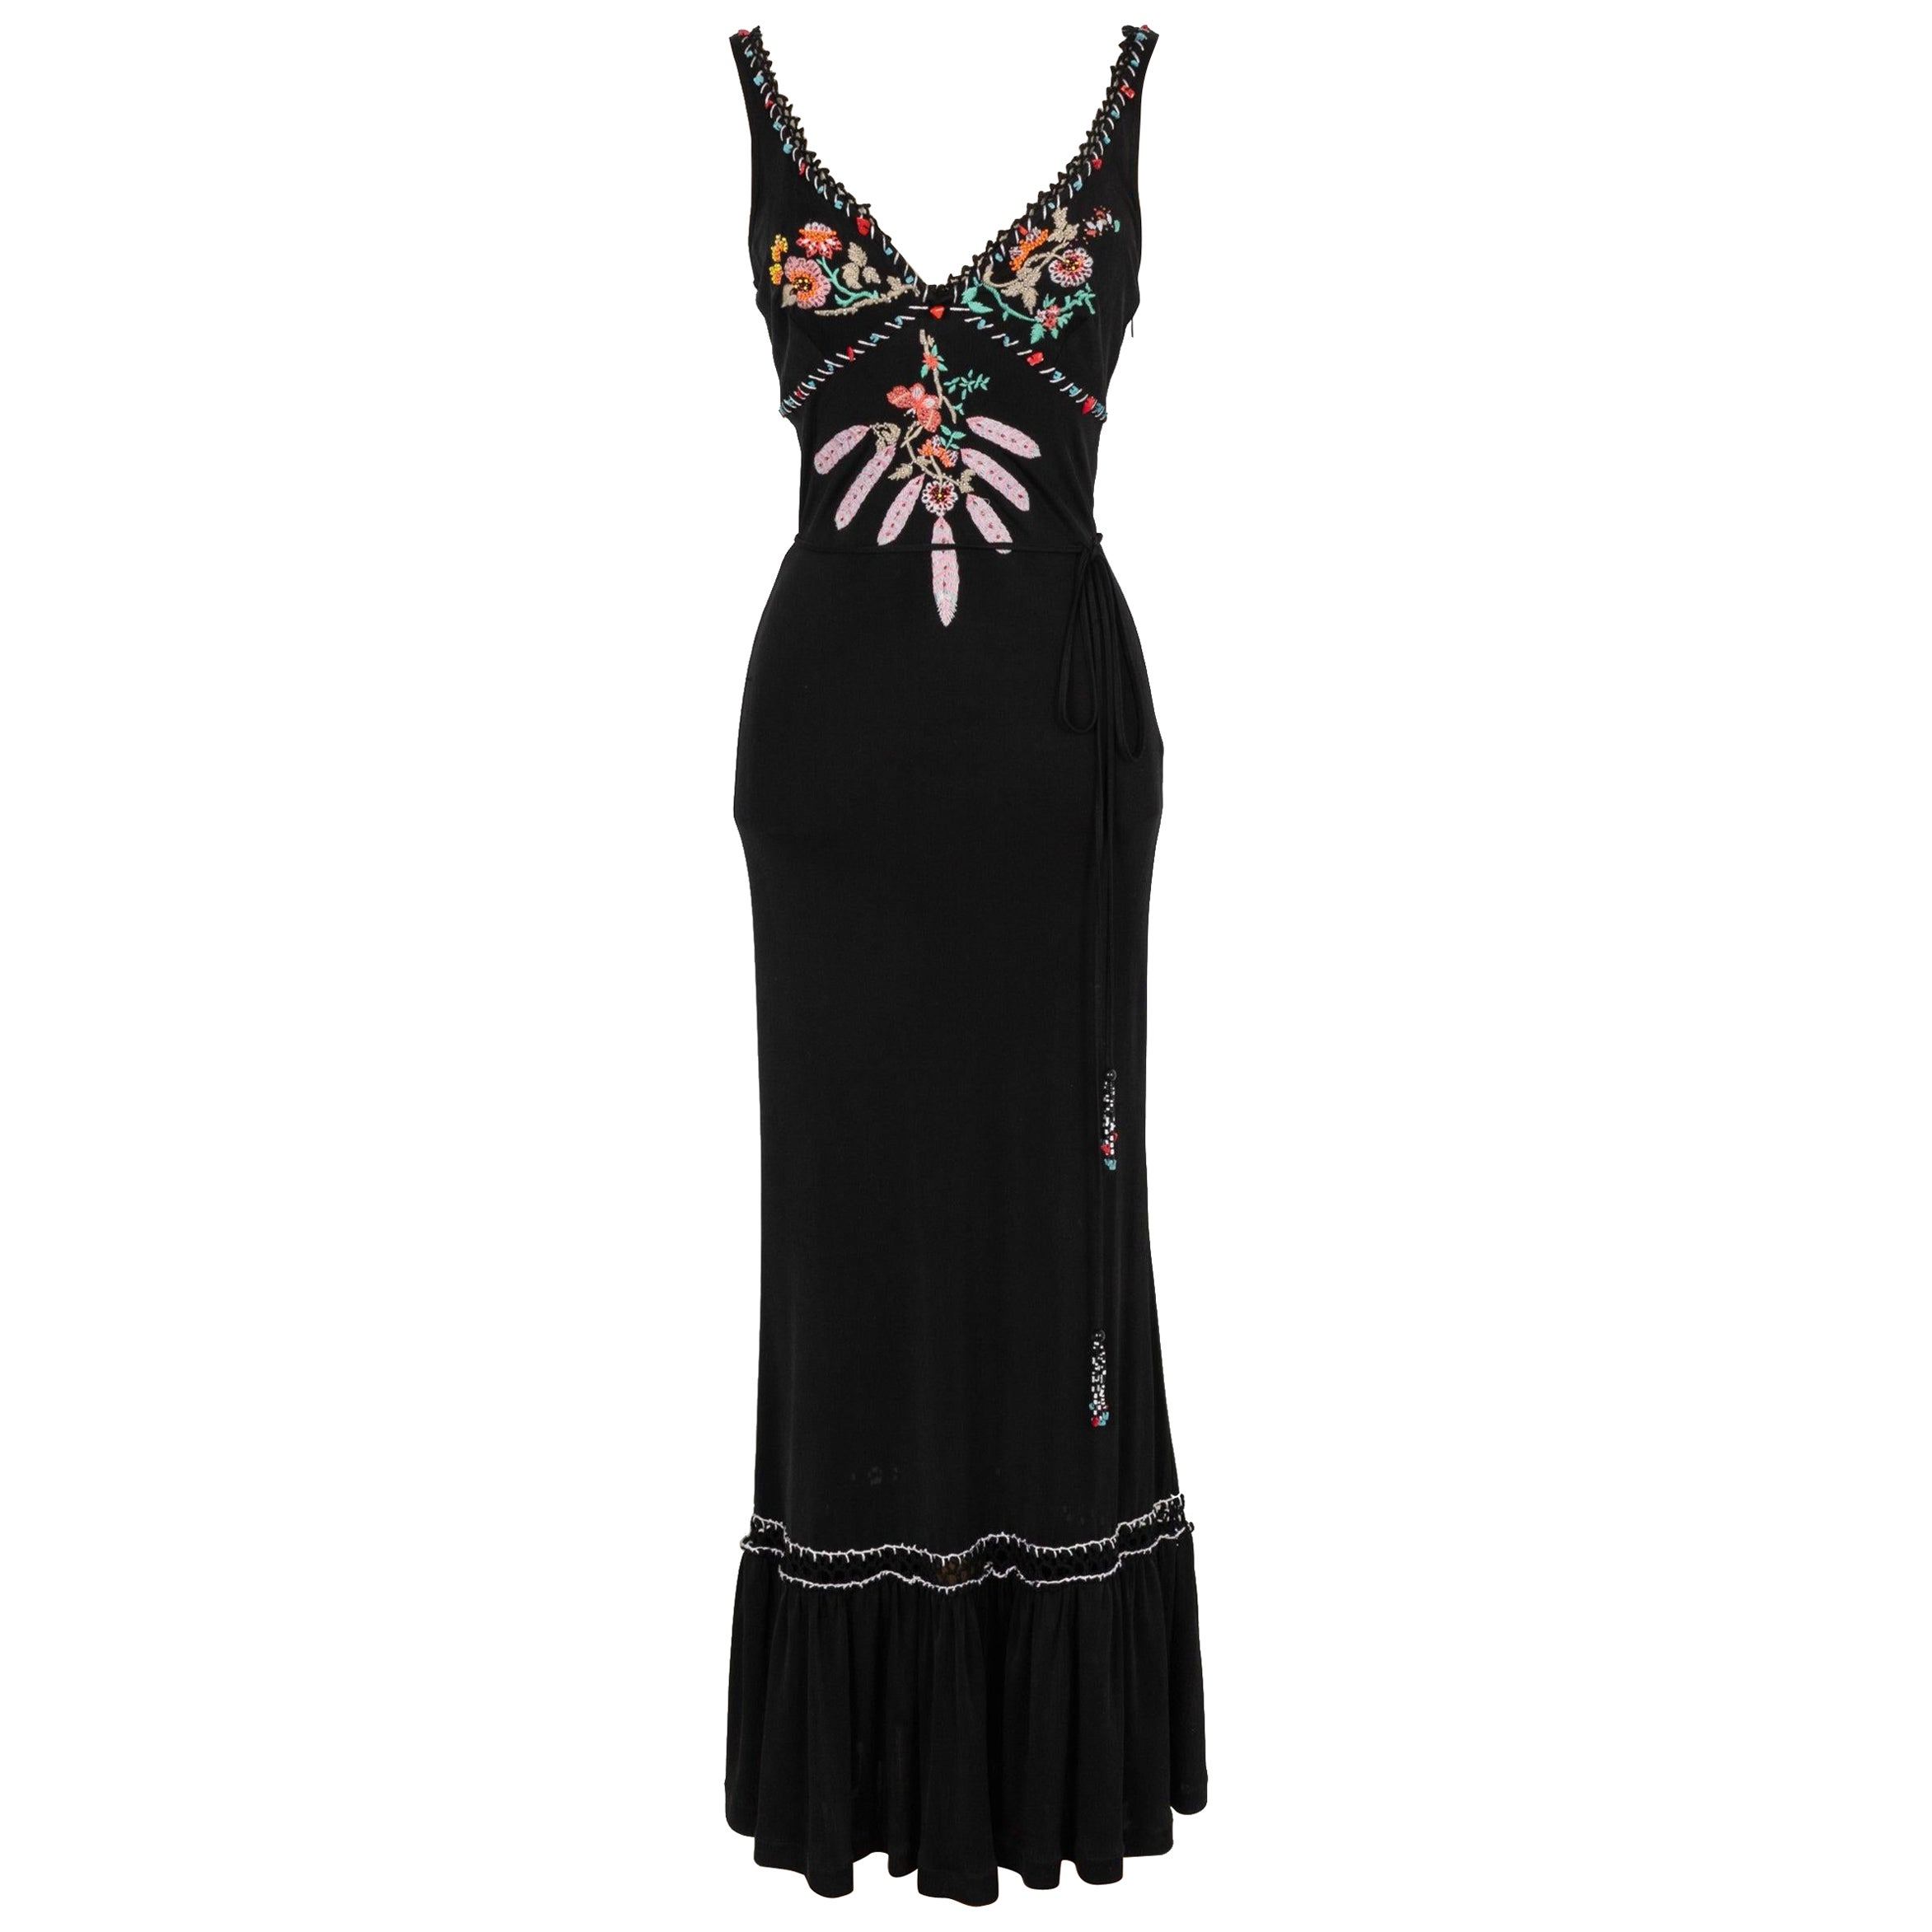 Cavalli Black Jersey Long Dress Embroidered with Yarns and Pearls